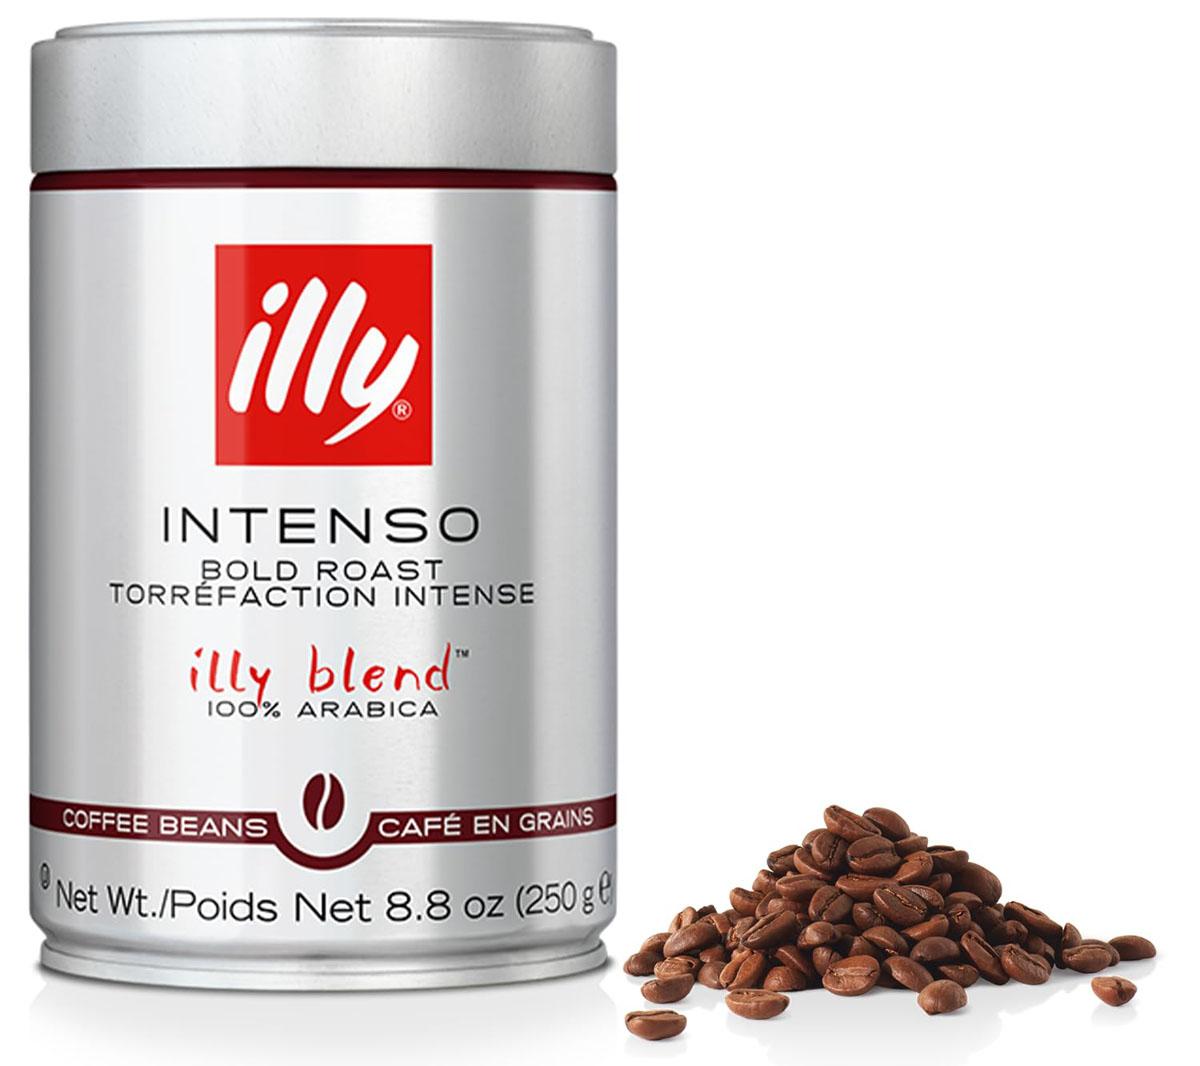 illy Whole Bean Intenso Bold Roast Arabica Coffee for $8.24